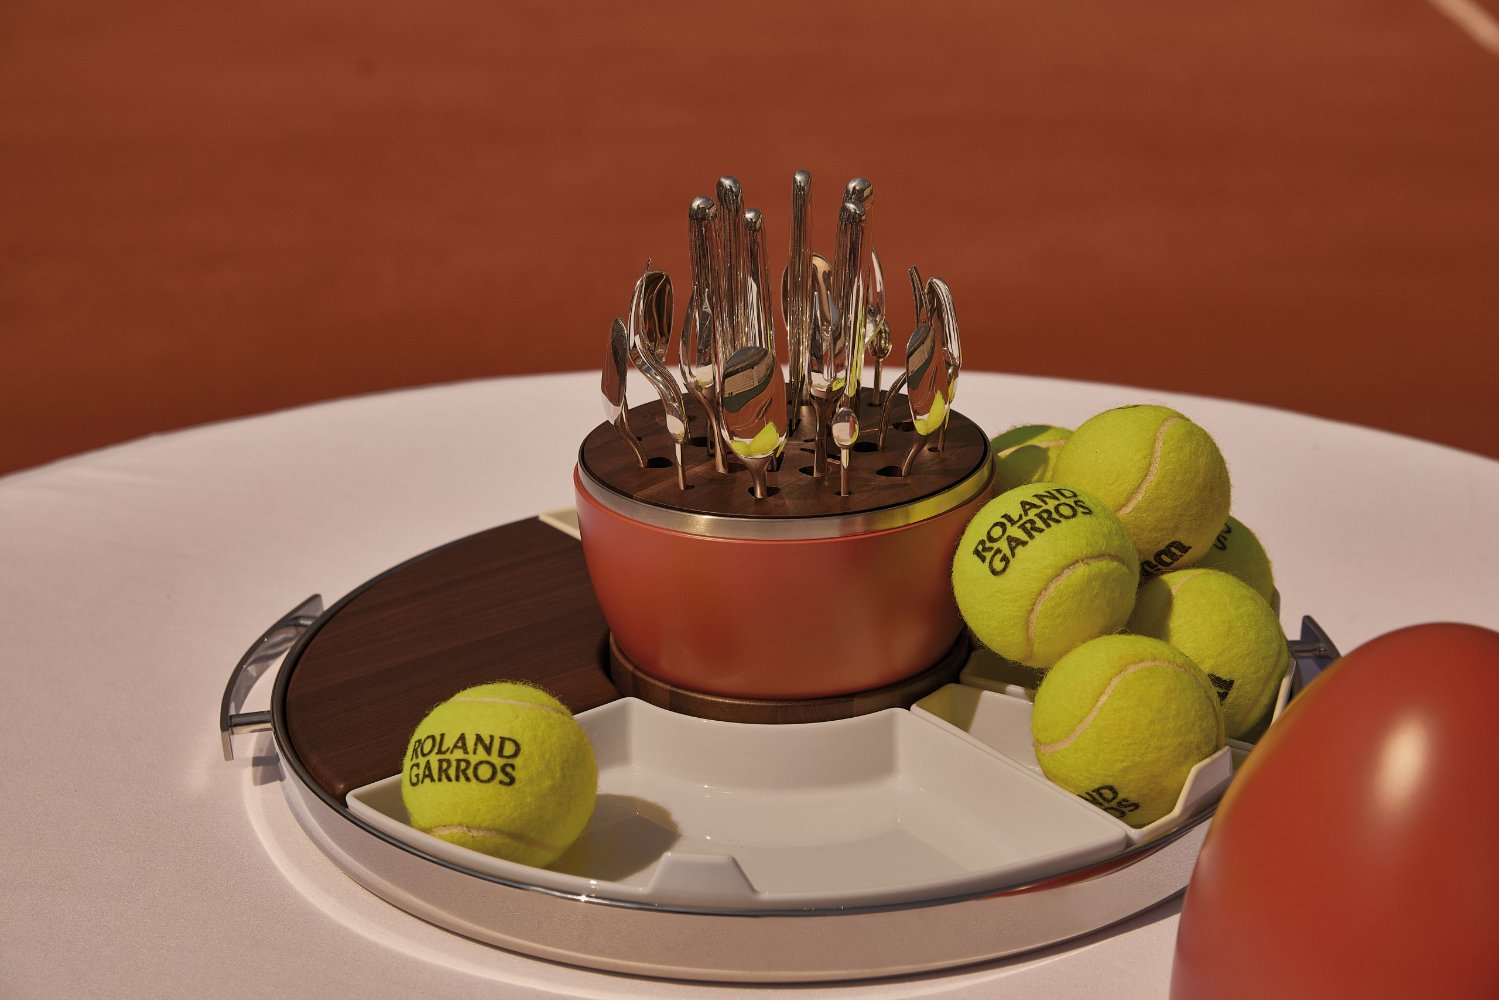 Tennis and Cutlery Join Forces in Christofle’s Witty Collaboration with the French Open